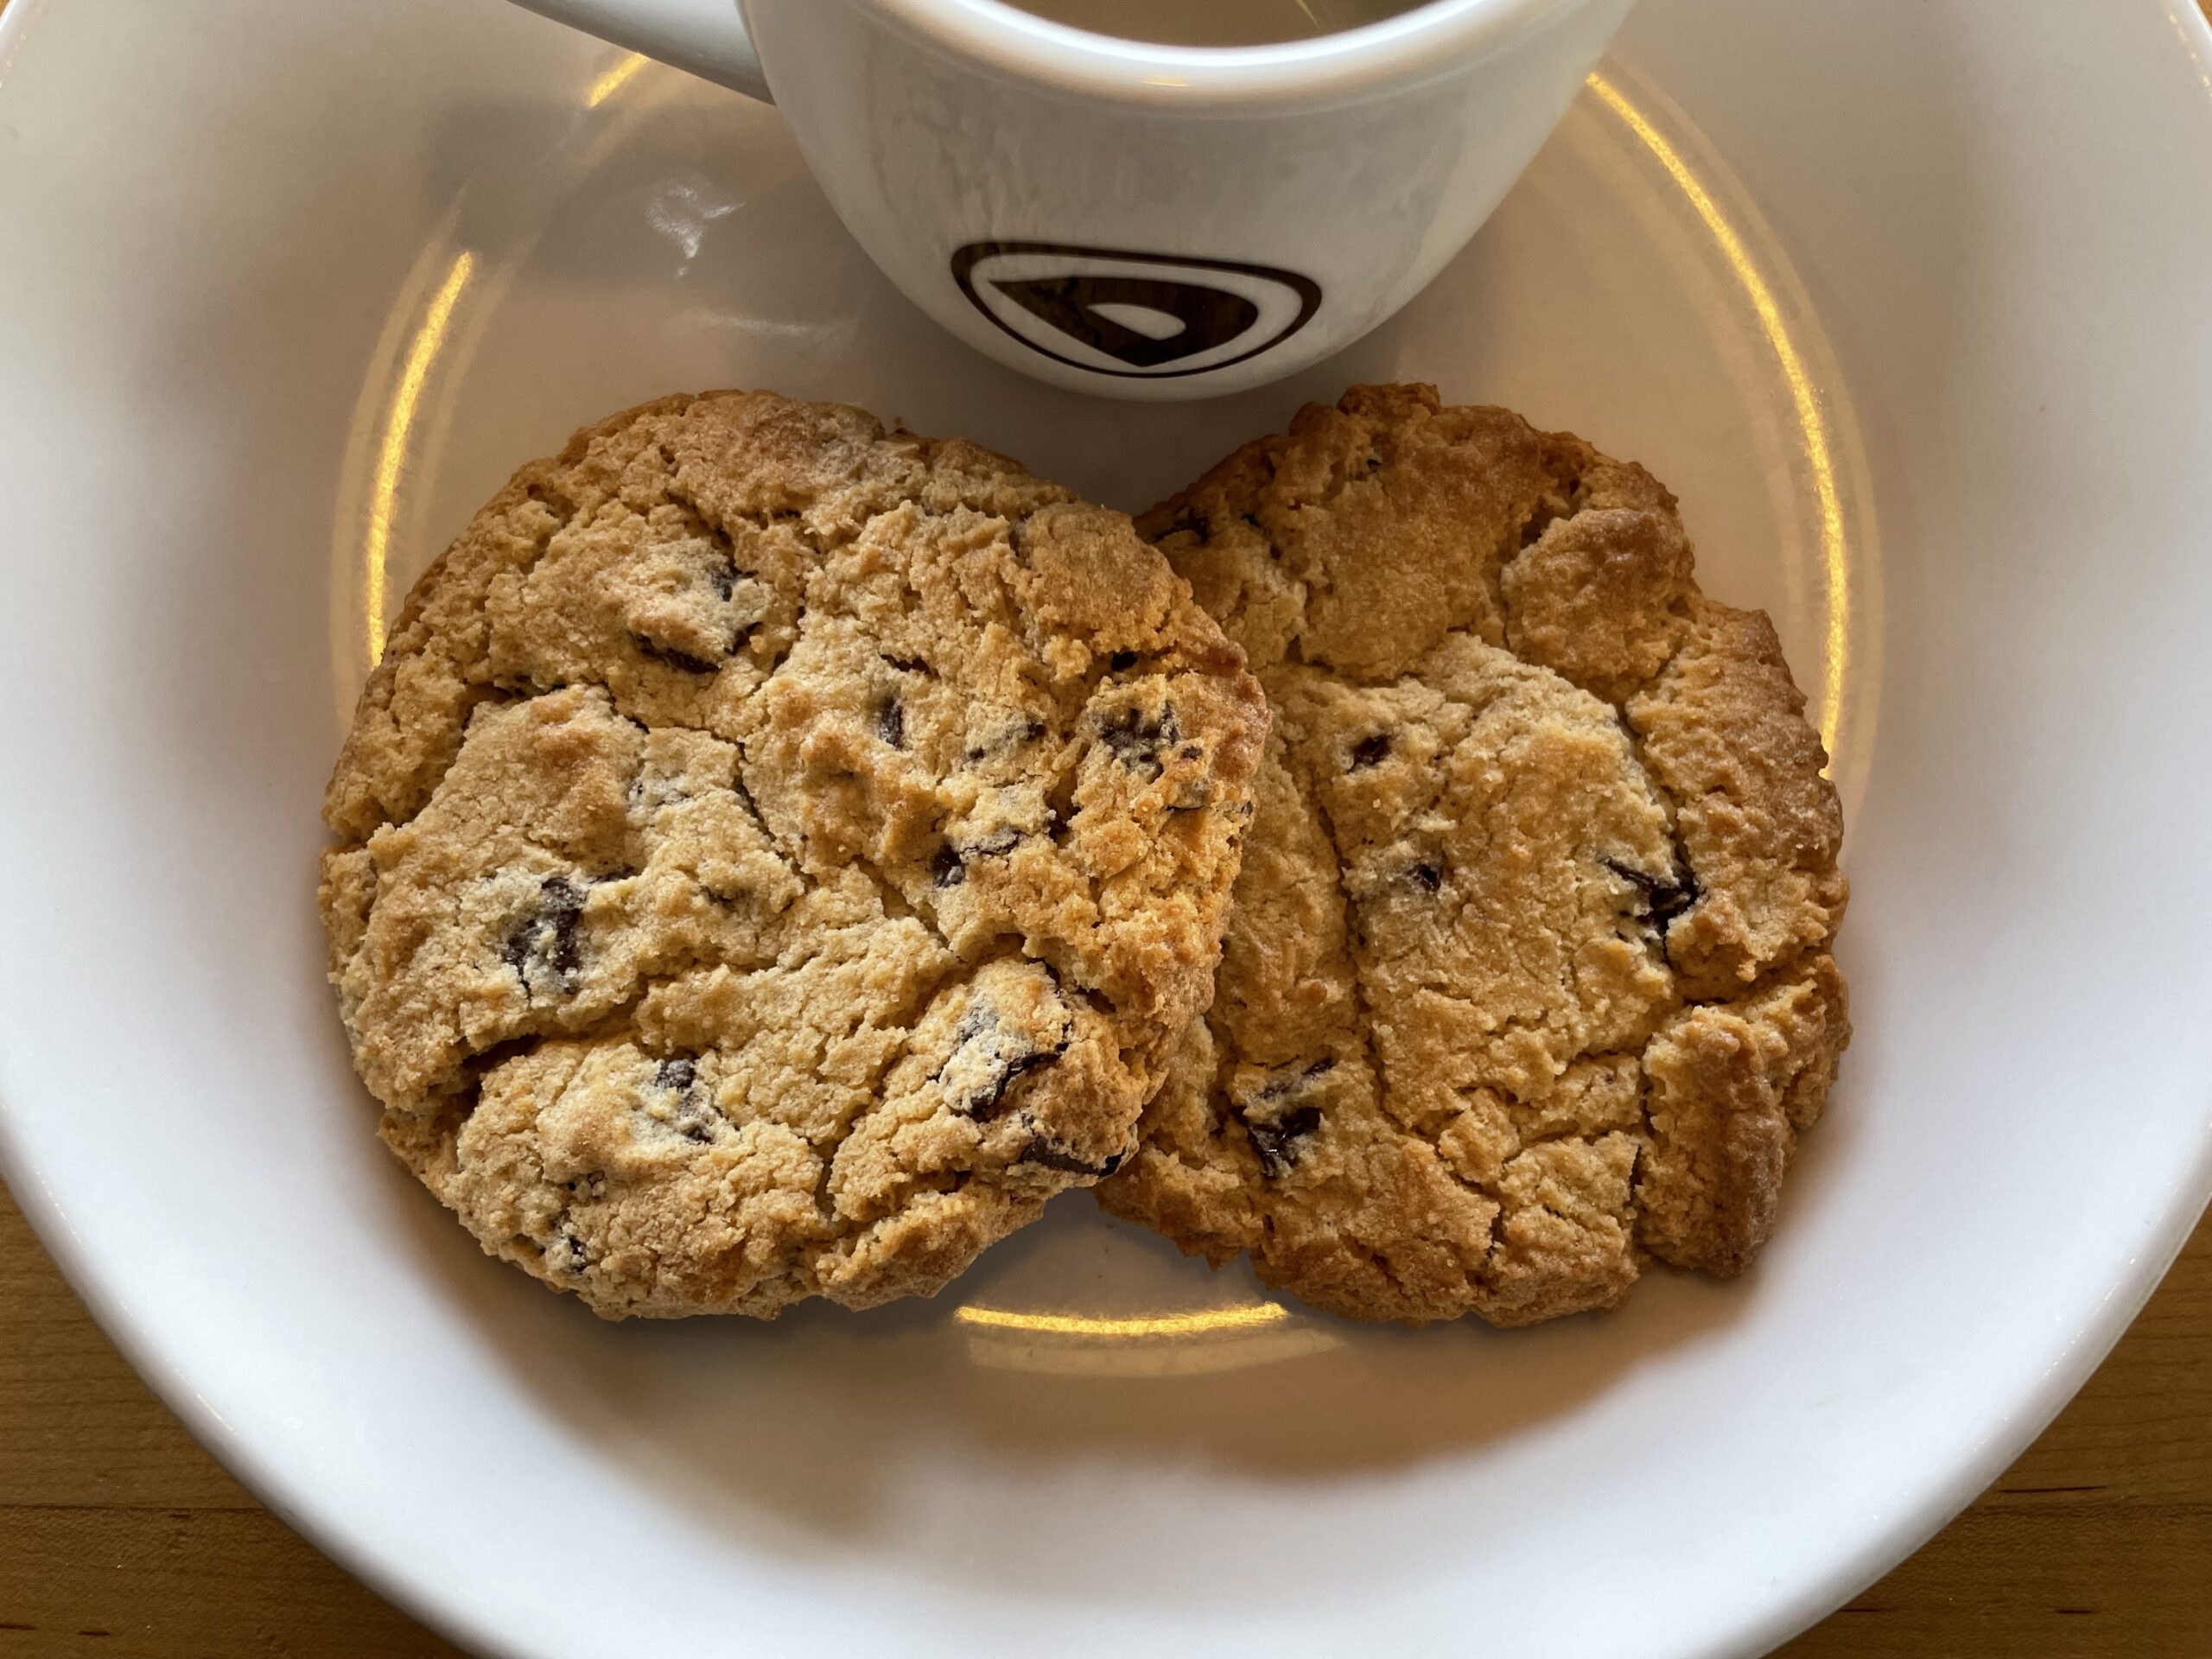 Outliers Baked Goods - Chocolate Chip Cookie